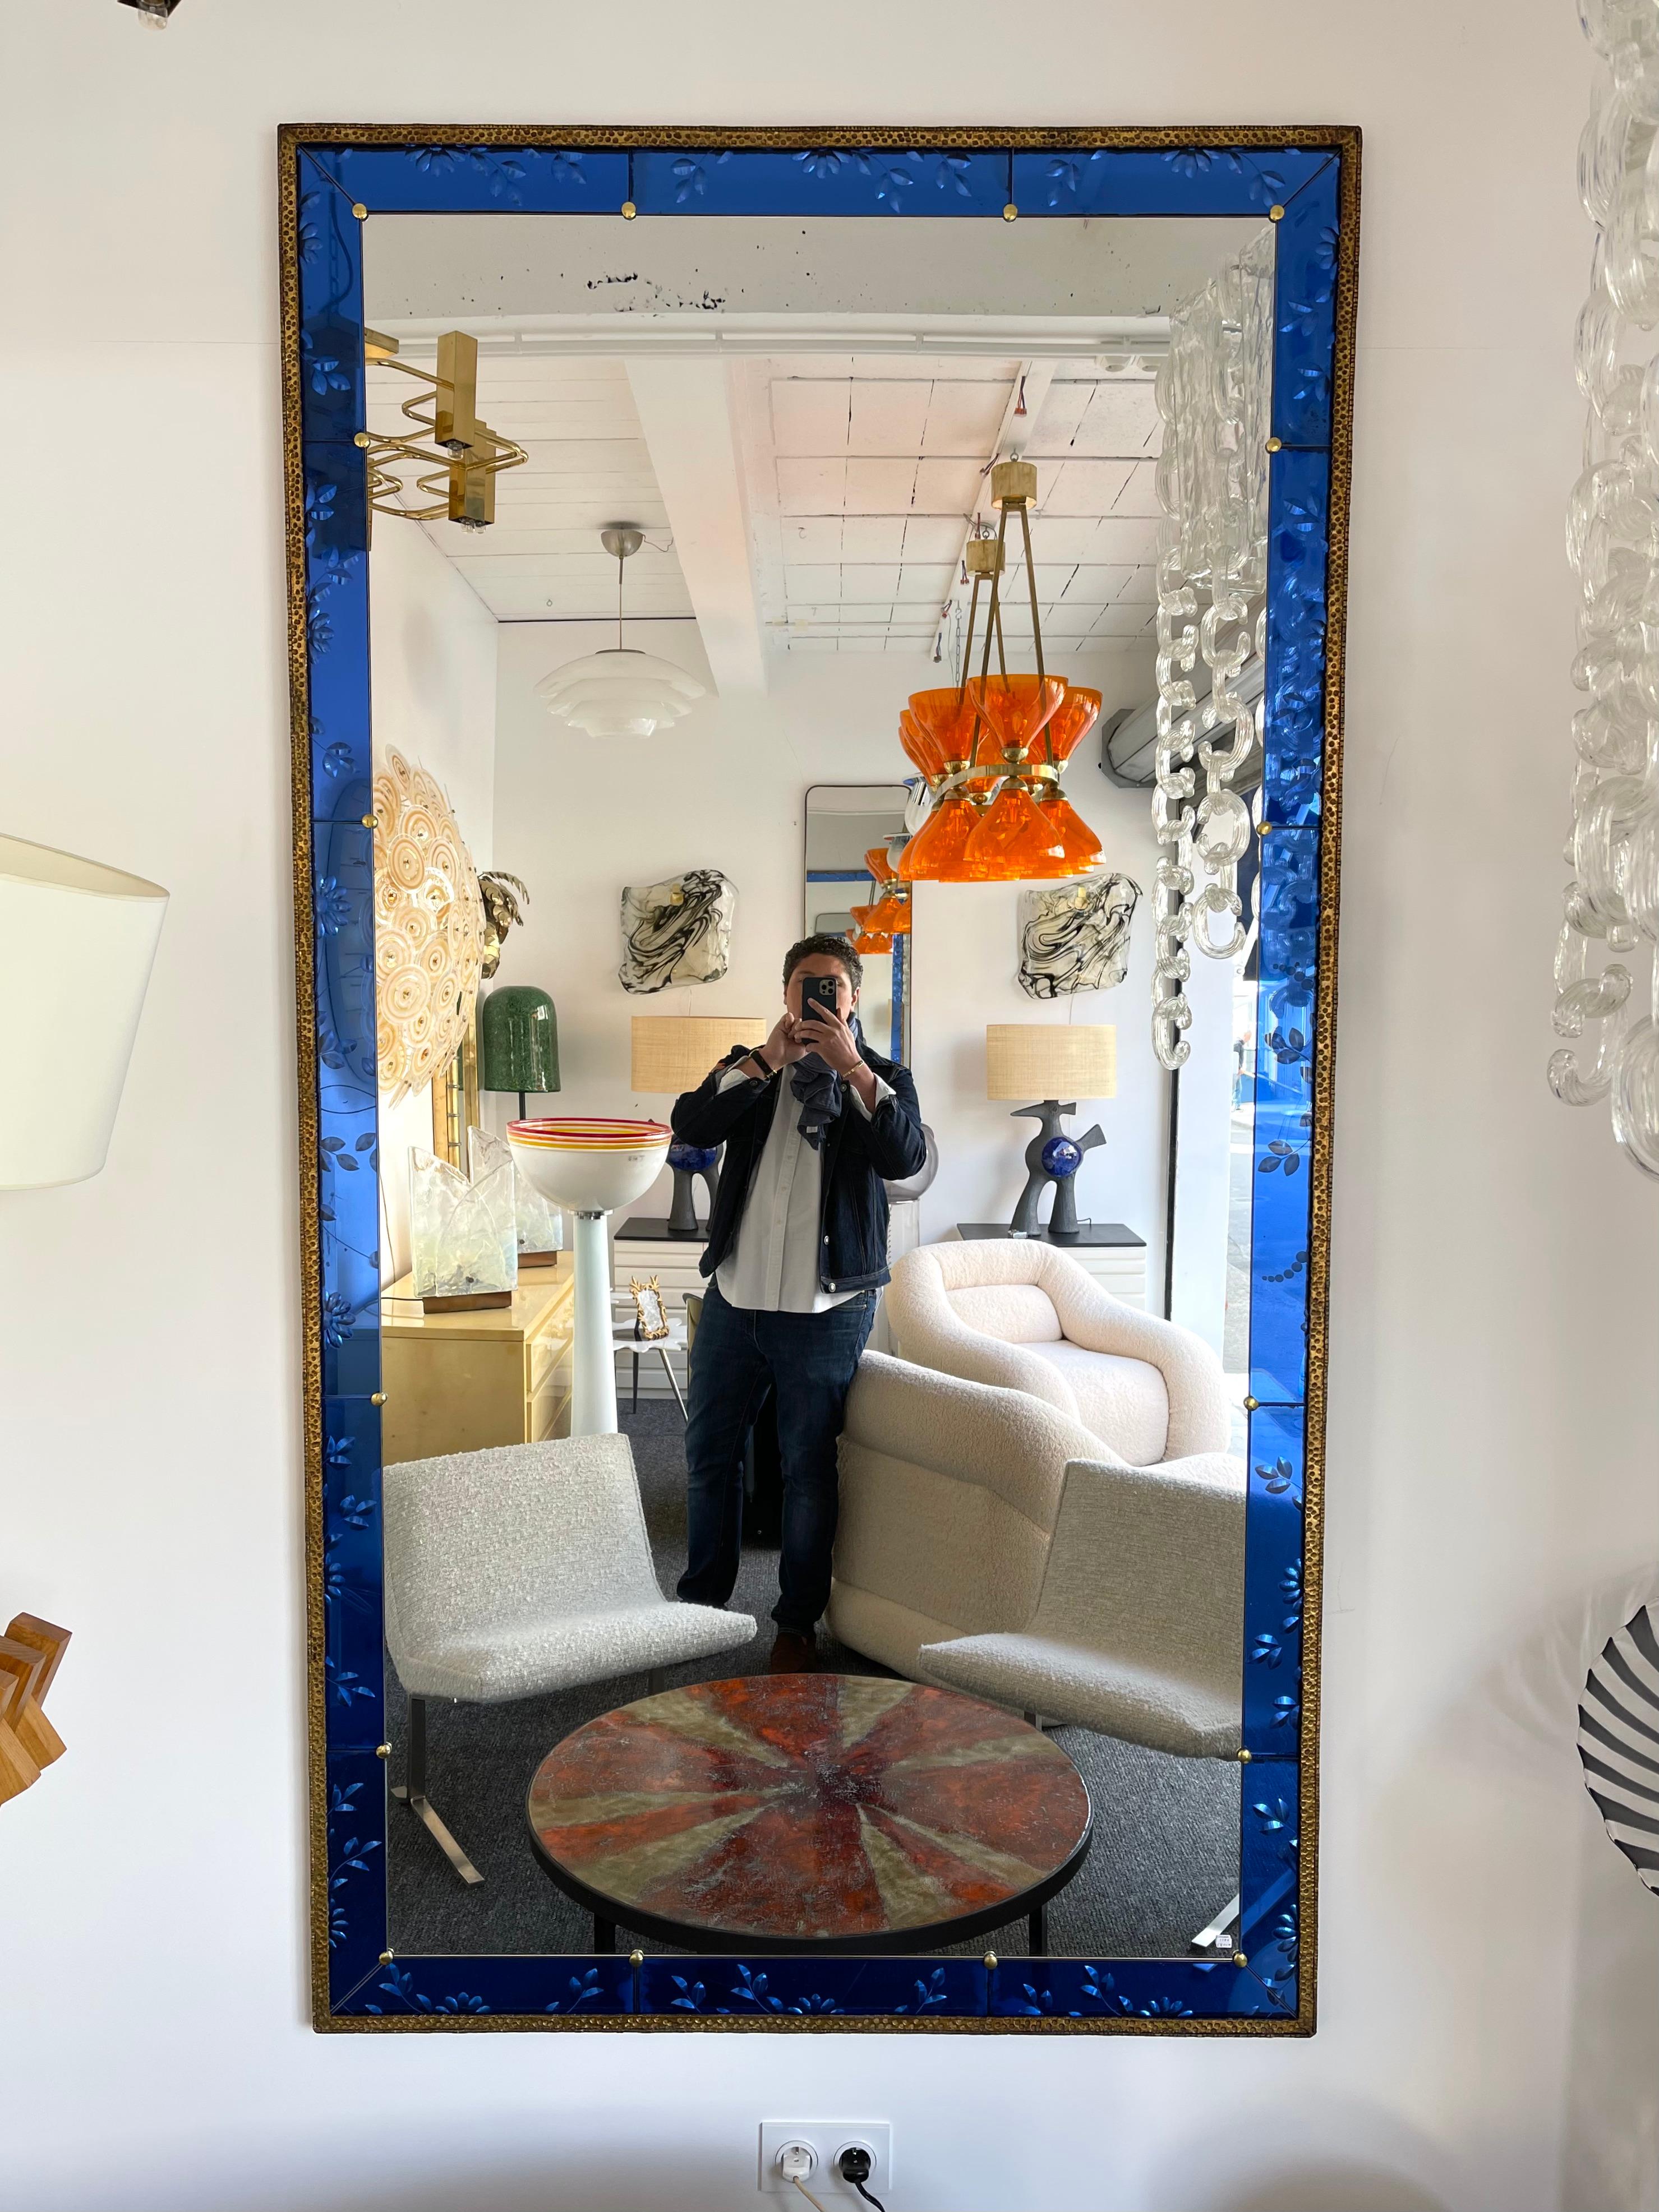 Extra large wall or full-length mirror blue engraving glass with gilt hammered wrought iron frame, brass details by the italian manufacture Pier Luigi Colli very probably a collaboration with the manufacture Cristal Art. Famous manufacture like